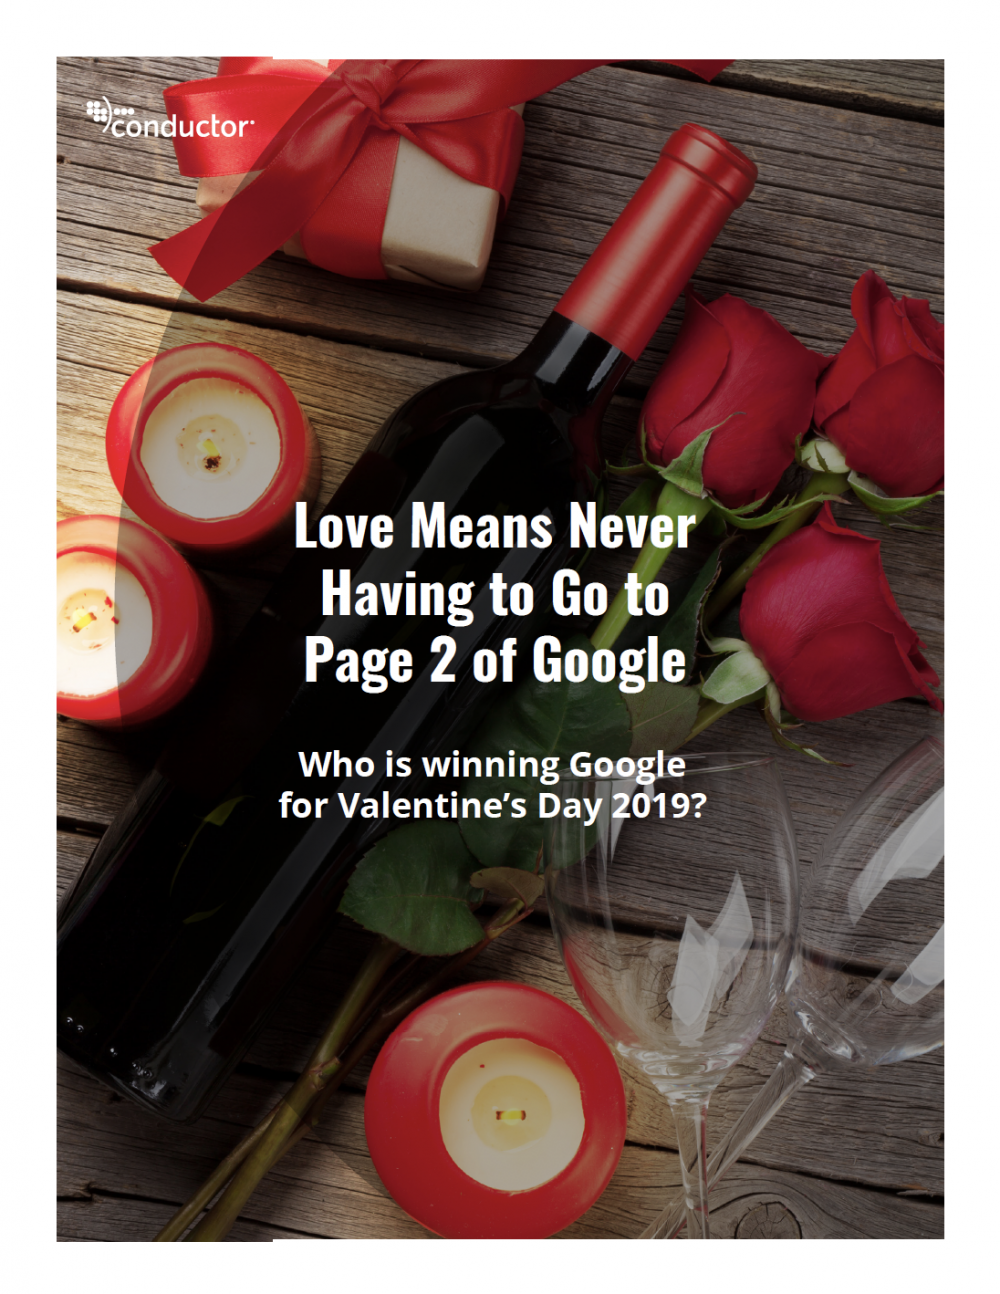 Conductor's Valentine's Day SEO research for 2019 reveals new insights into seasonal retail marketing.